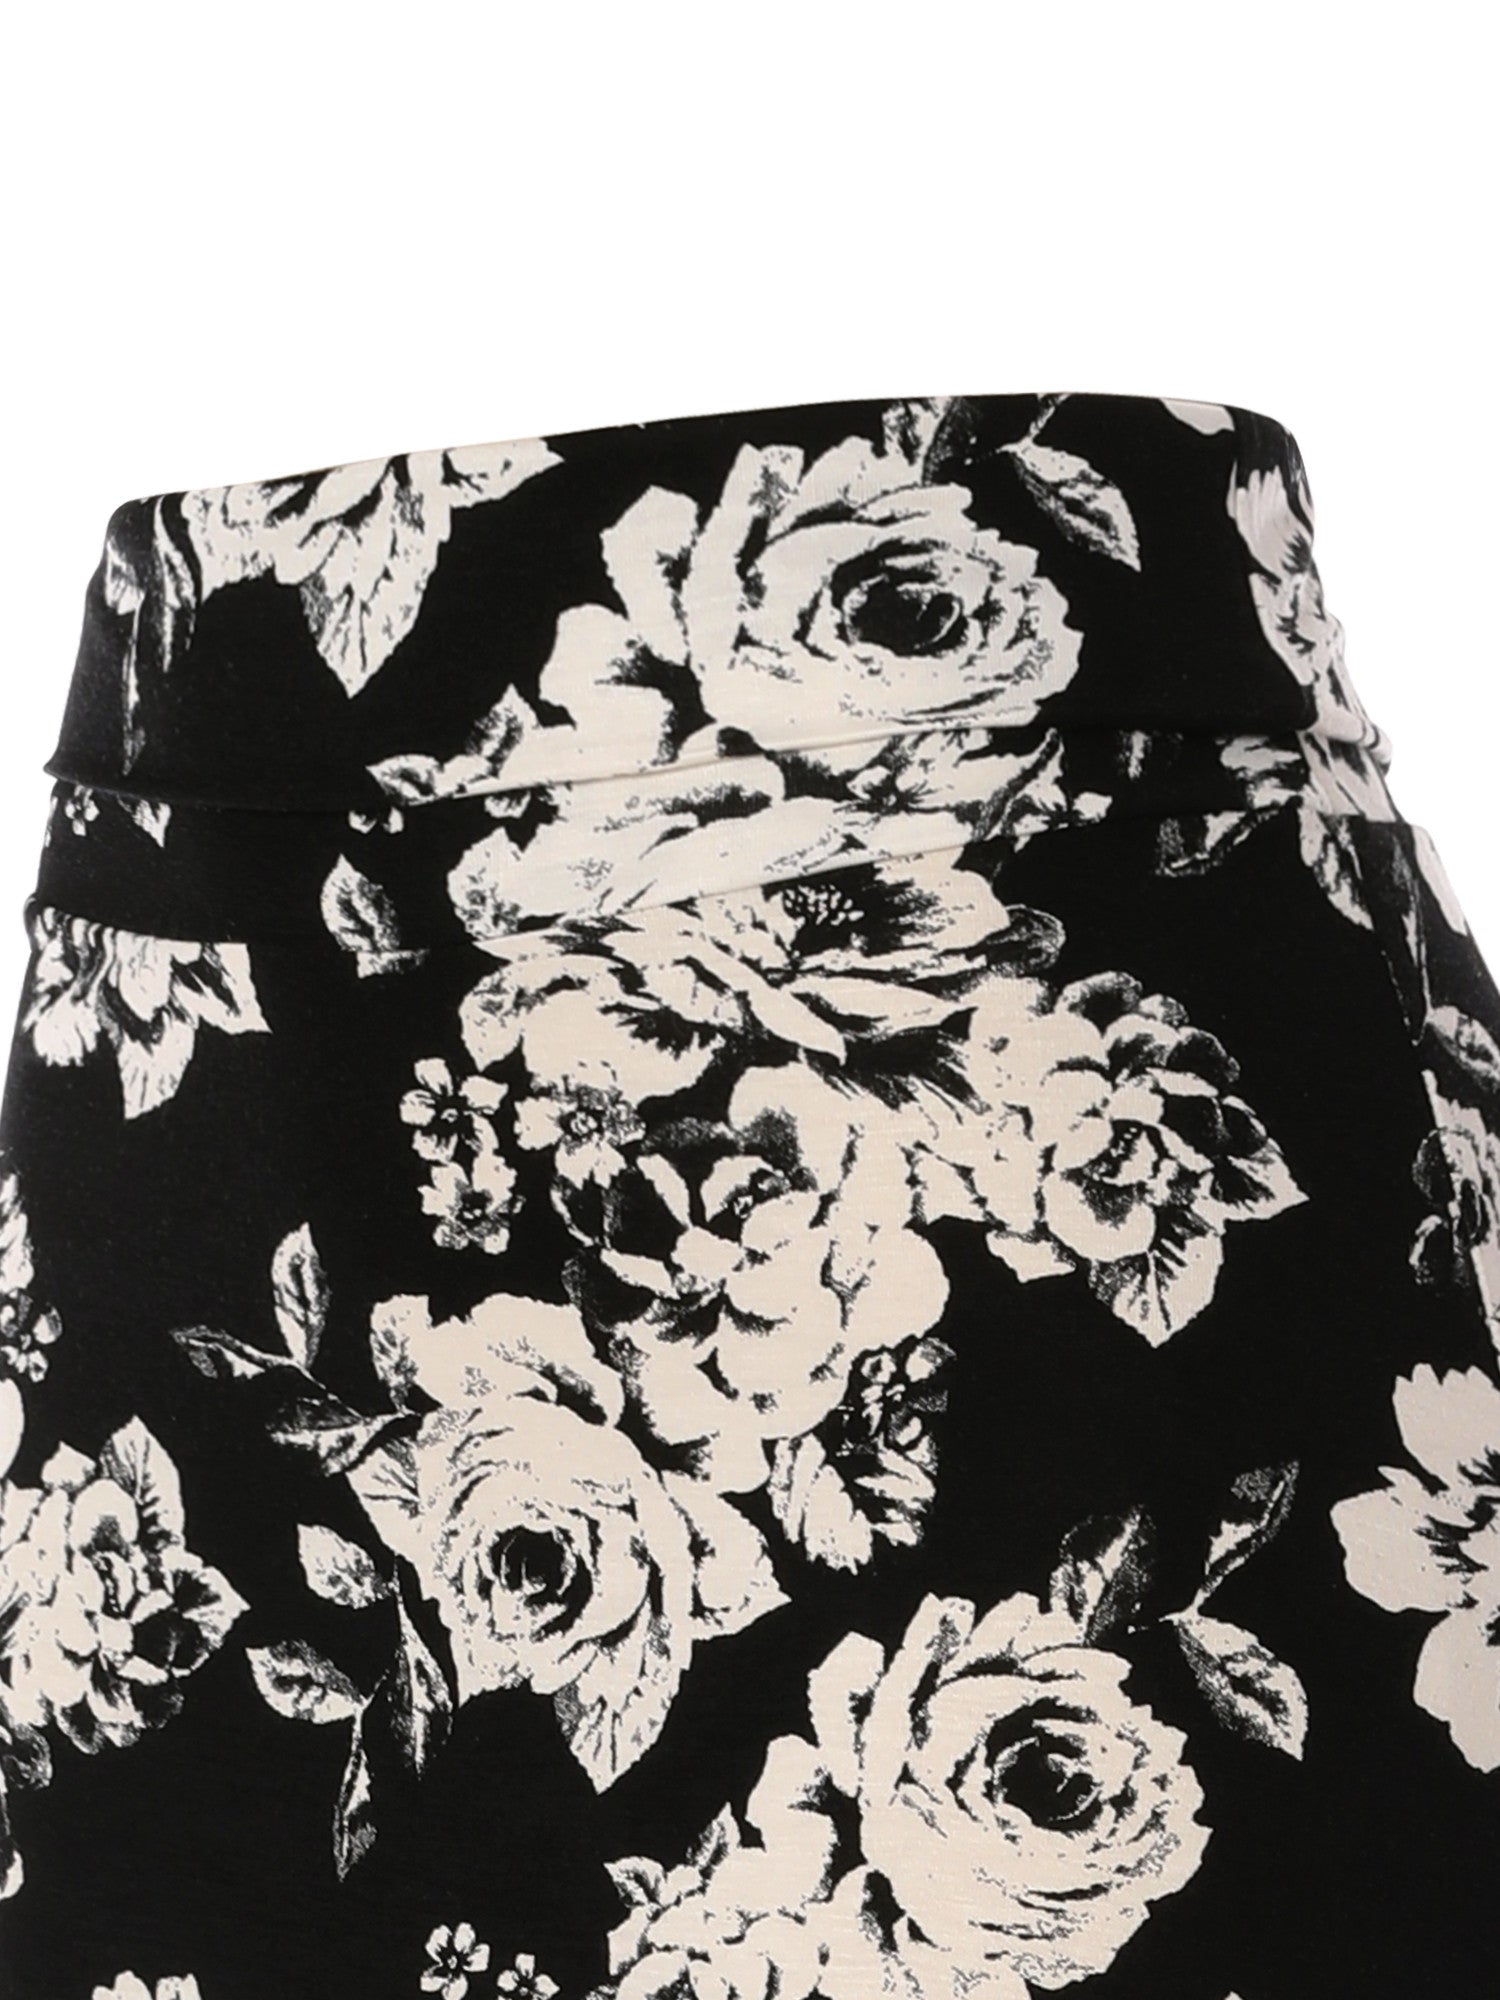 Stretchy High Waisted Floral Patterned Maxi Skirt